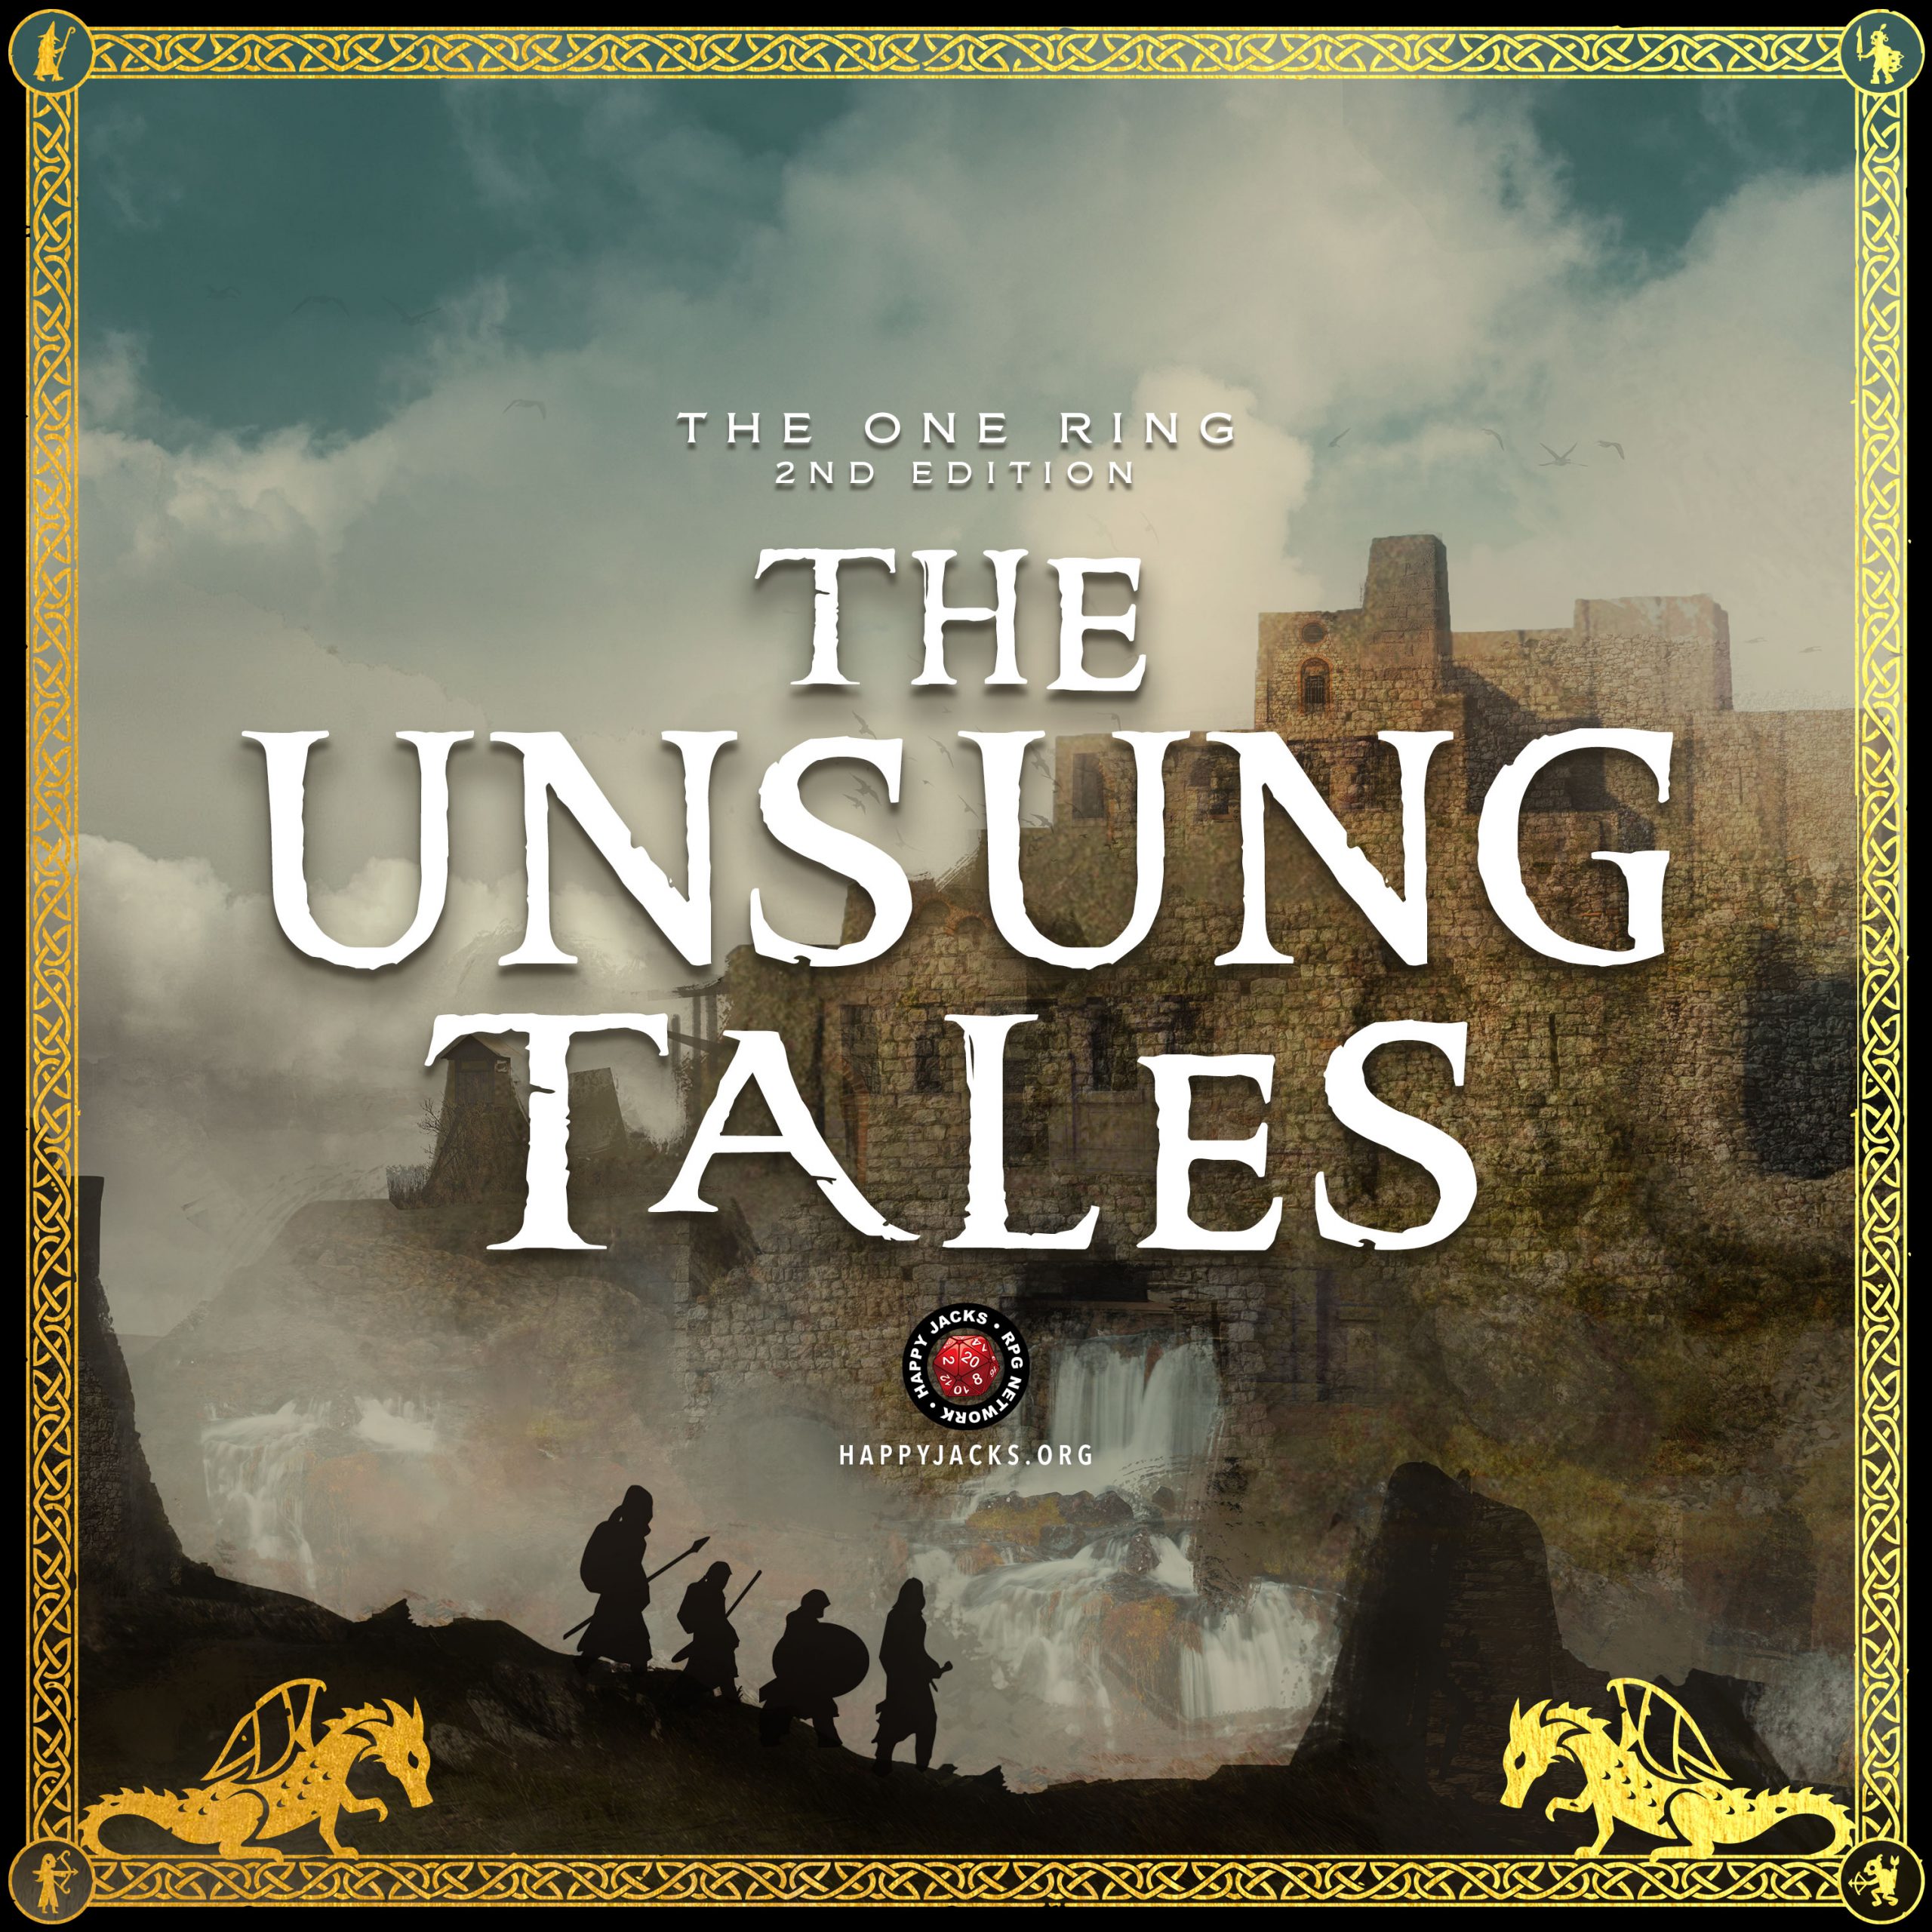 UNSUNG00 Character Creation | The Unsung Tales | The One Ring 2e